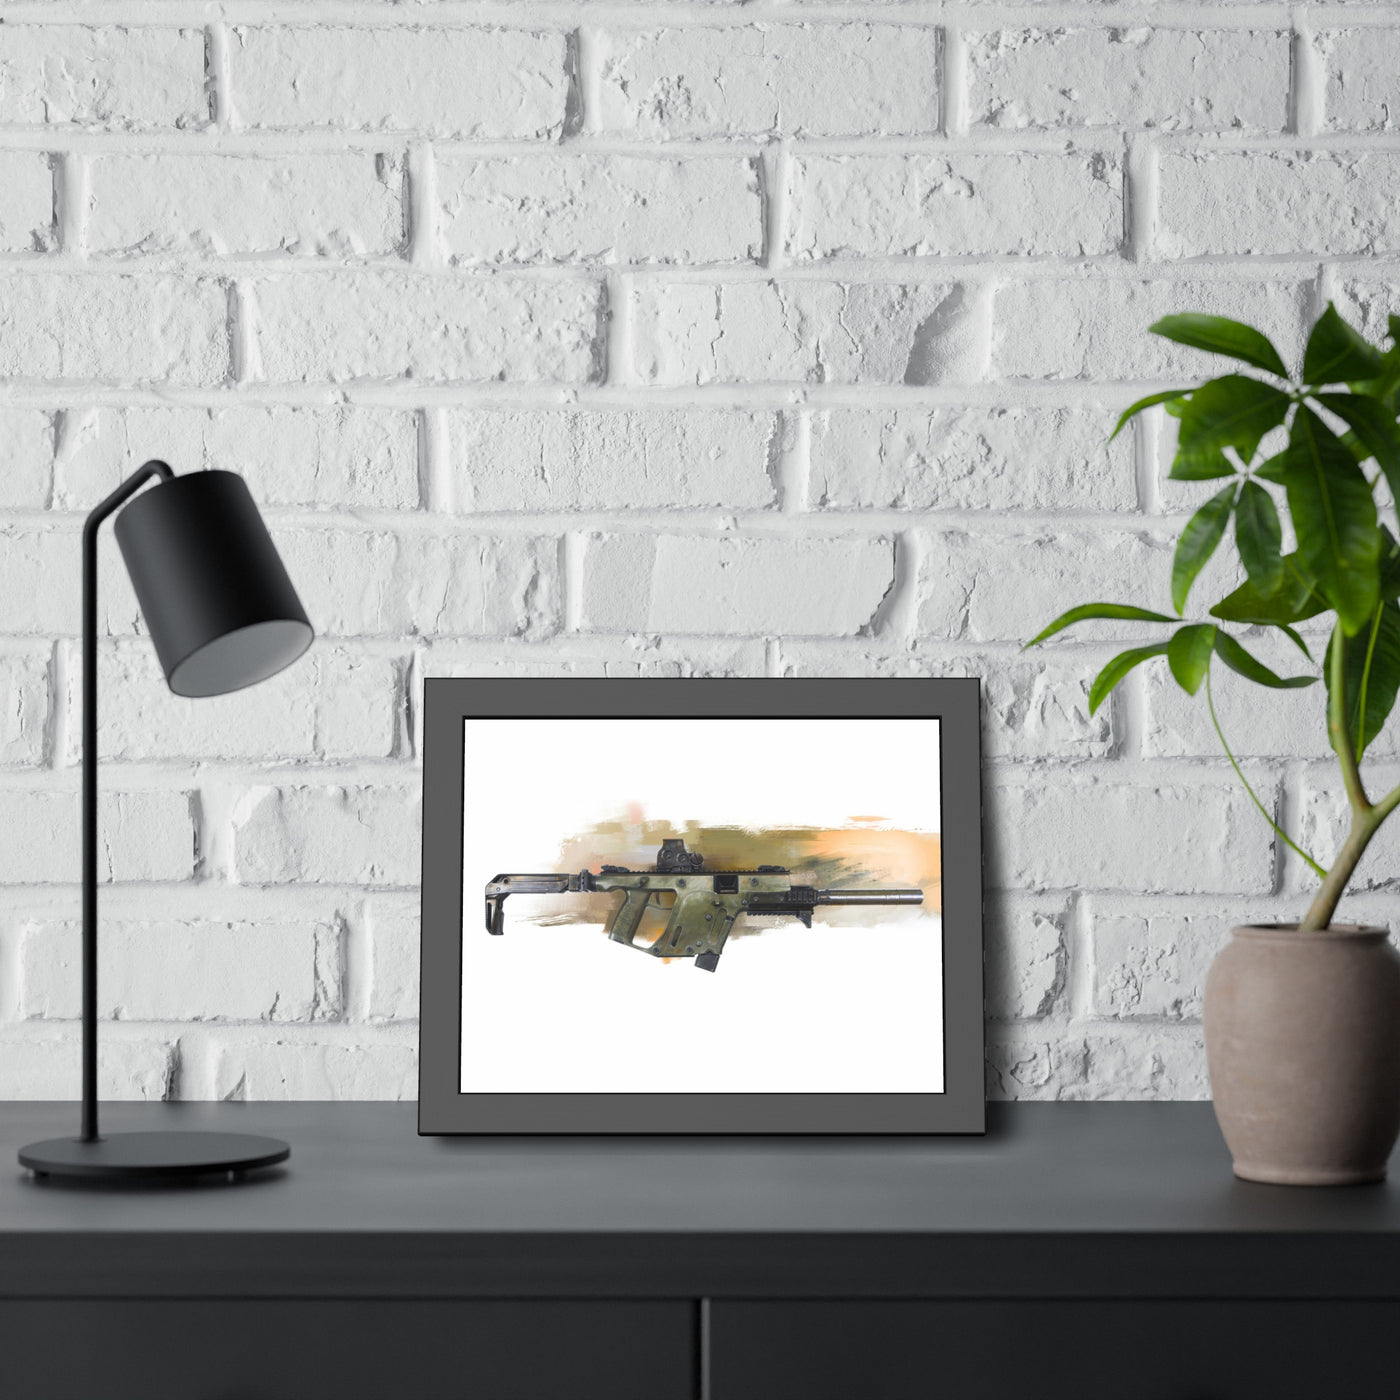 The Vindicator - Suppressed SMG Painting - Yellow Background - Black Frame - Value Collection